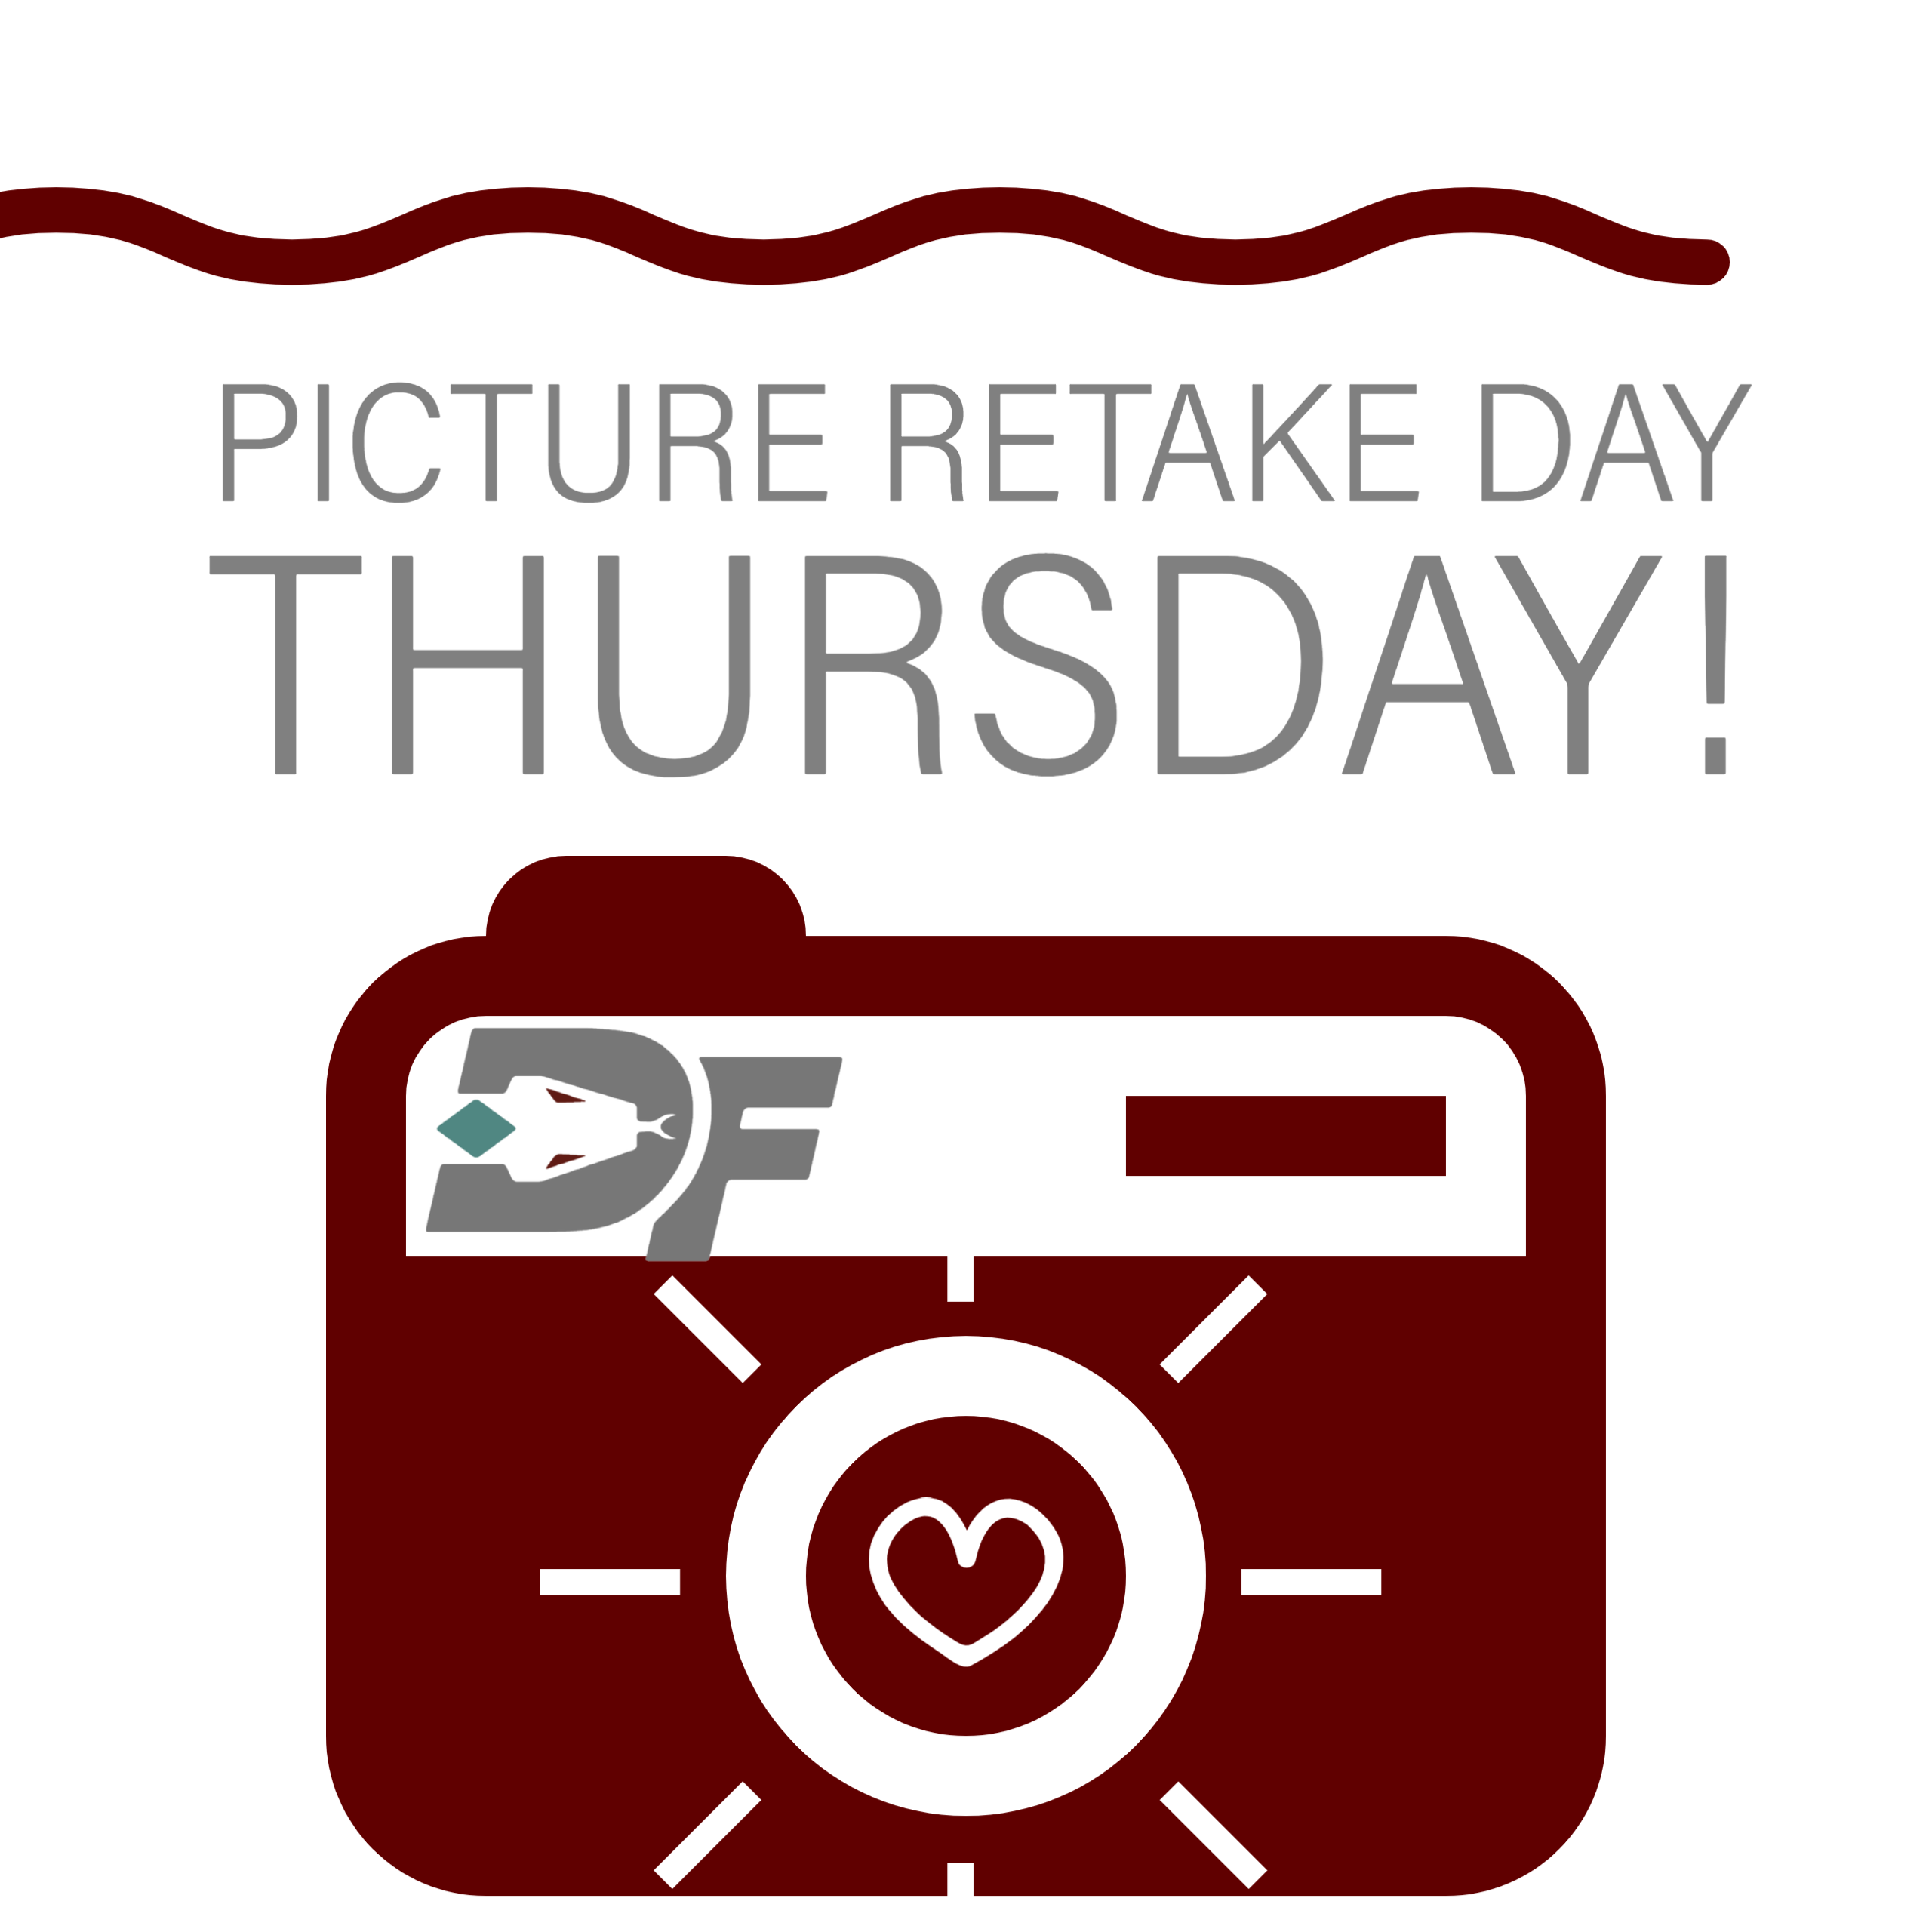 Picture Retake Day is Thursday!